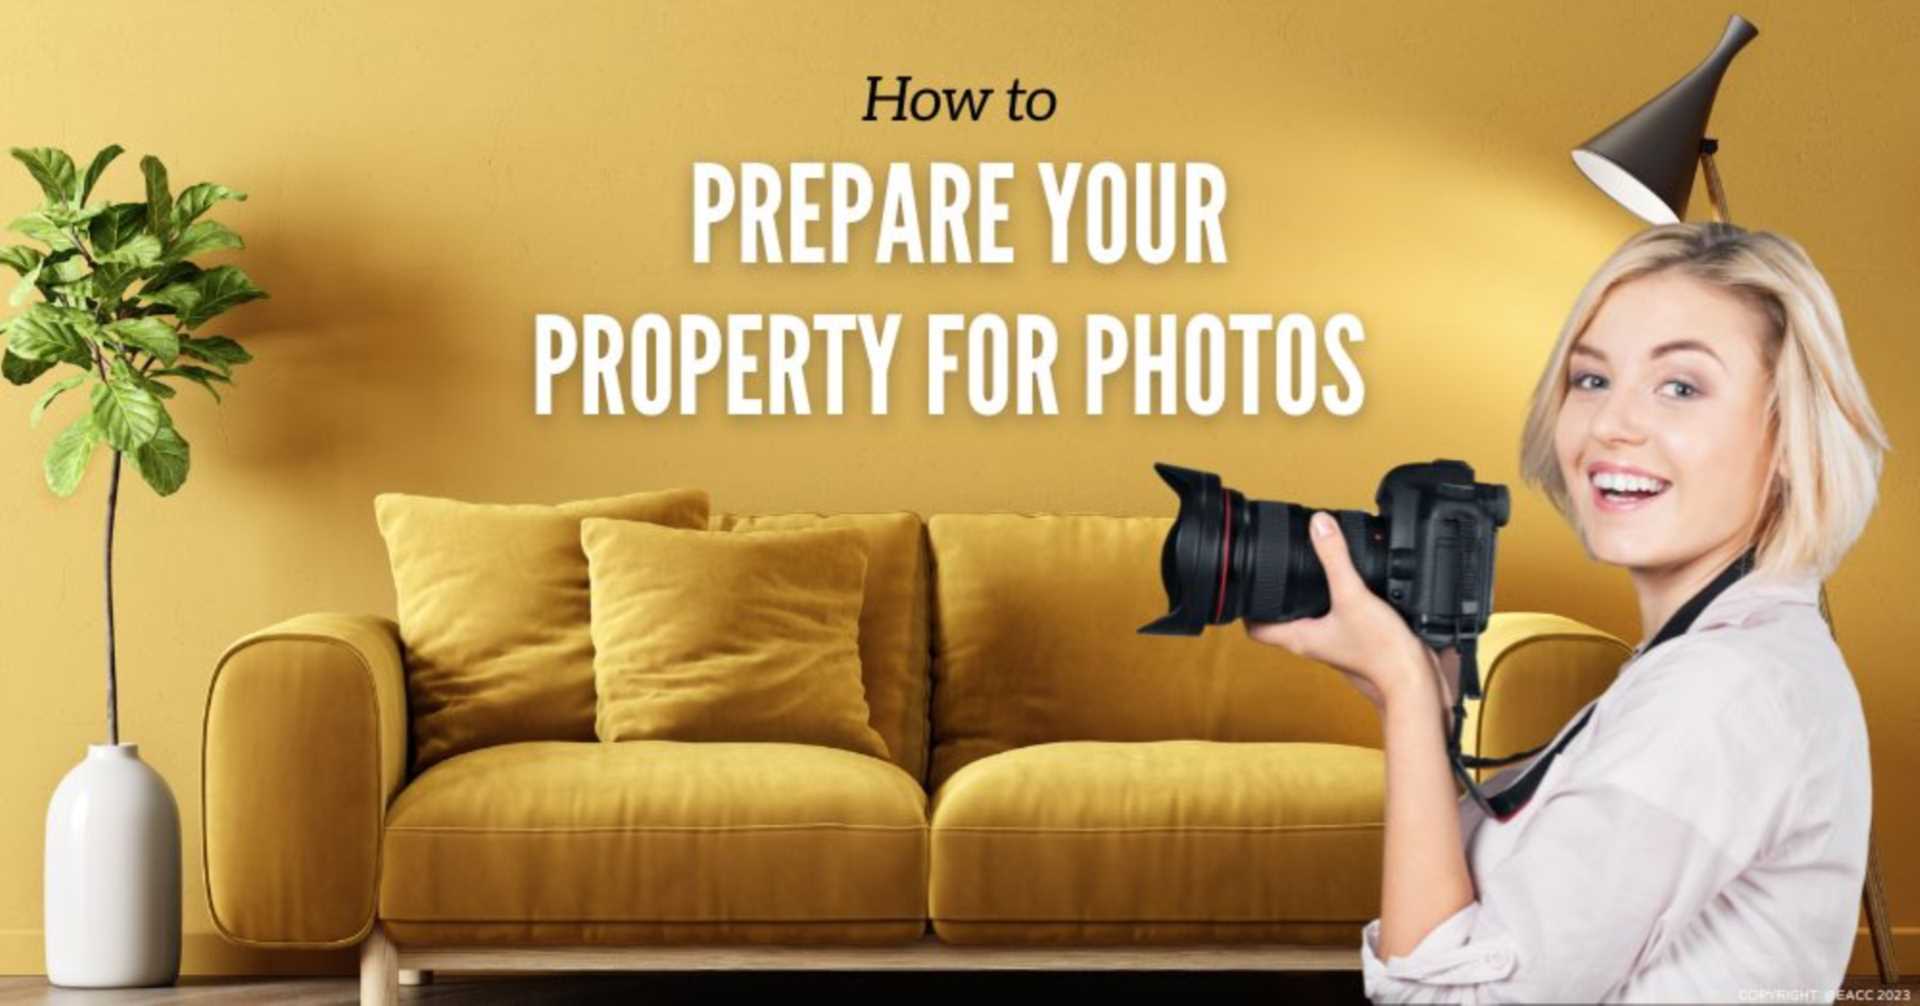 Preparing your property for photos